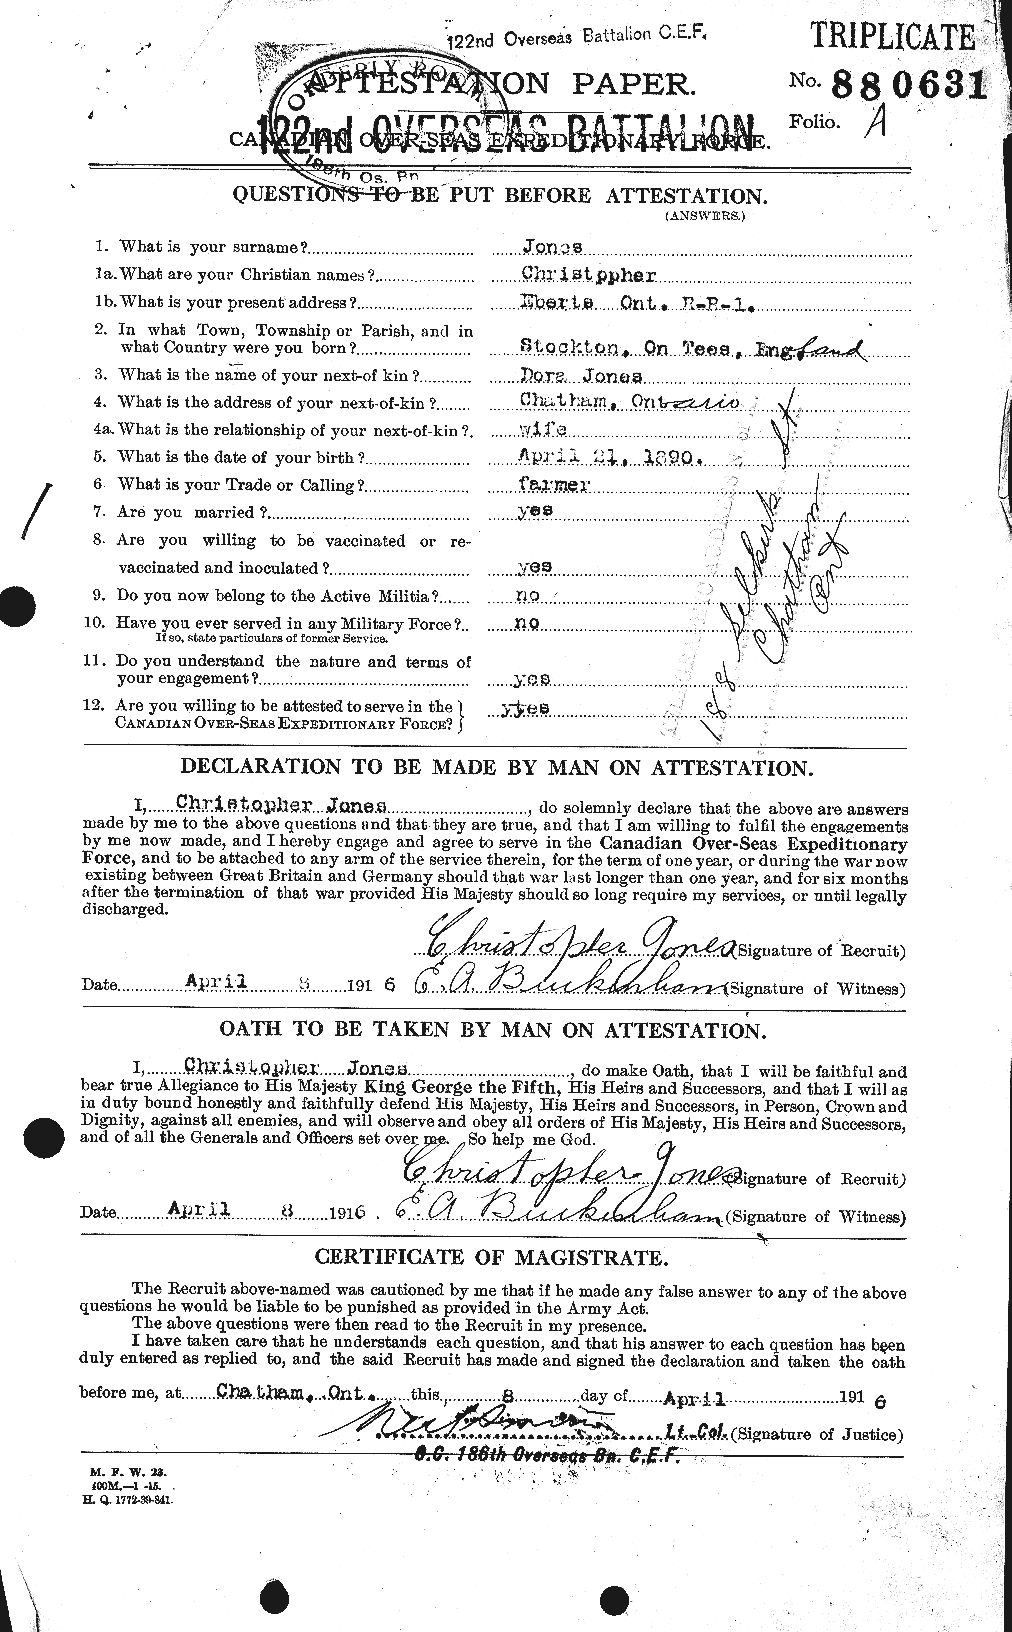 Personnel Records of the First World War - CEF 423882a